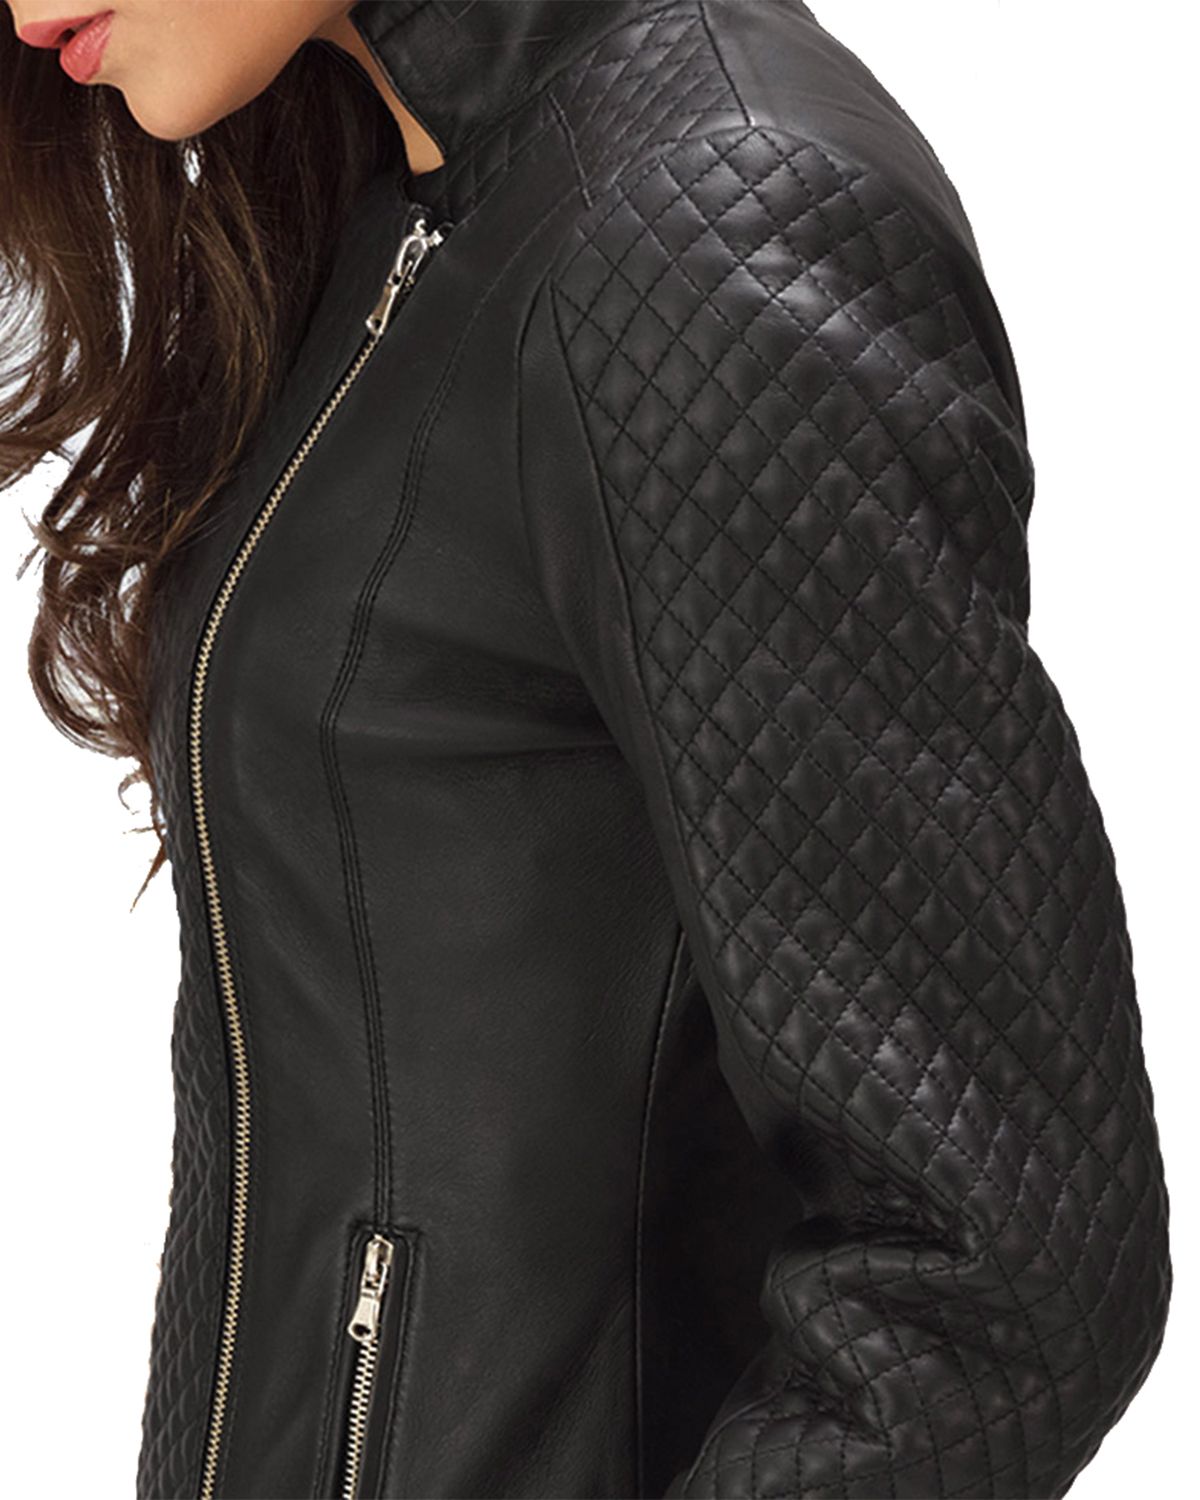 MotorCycleJackets Women's Quilted Black Leather Jacket